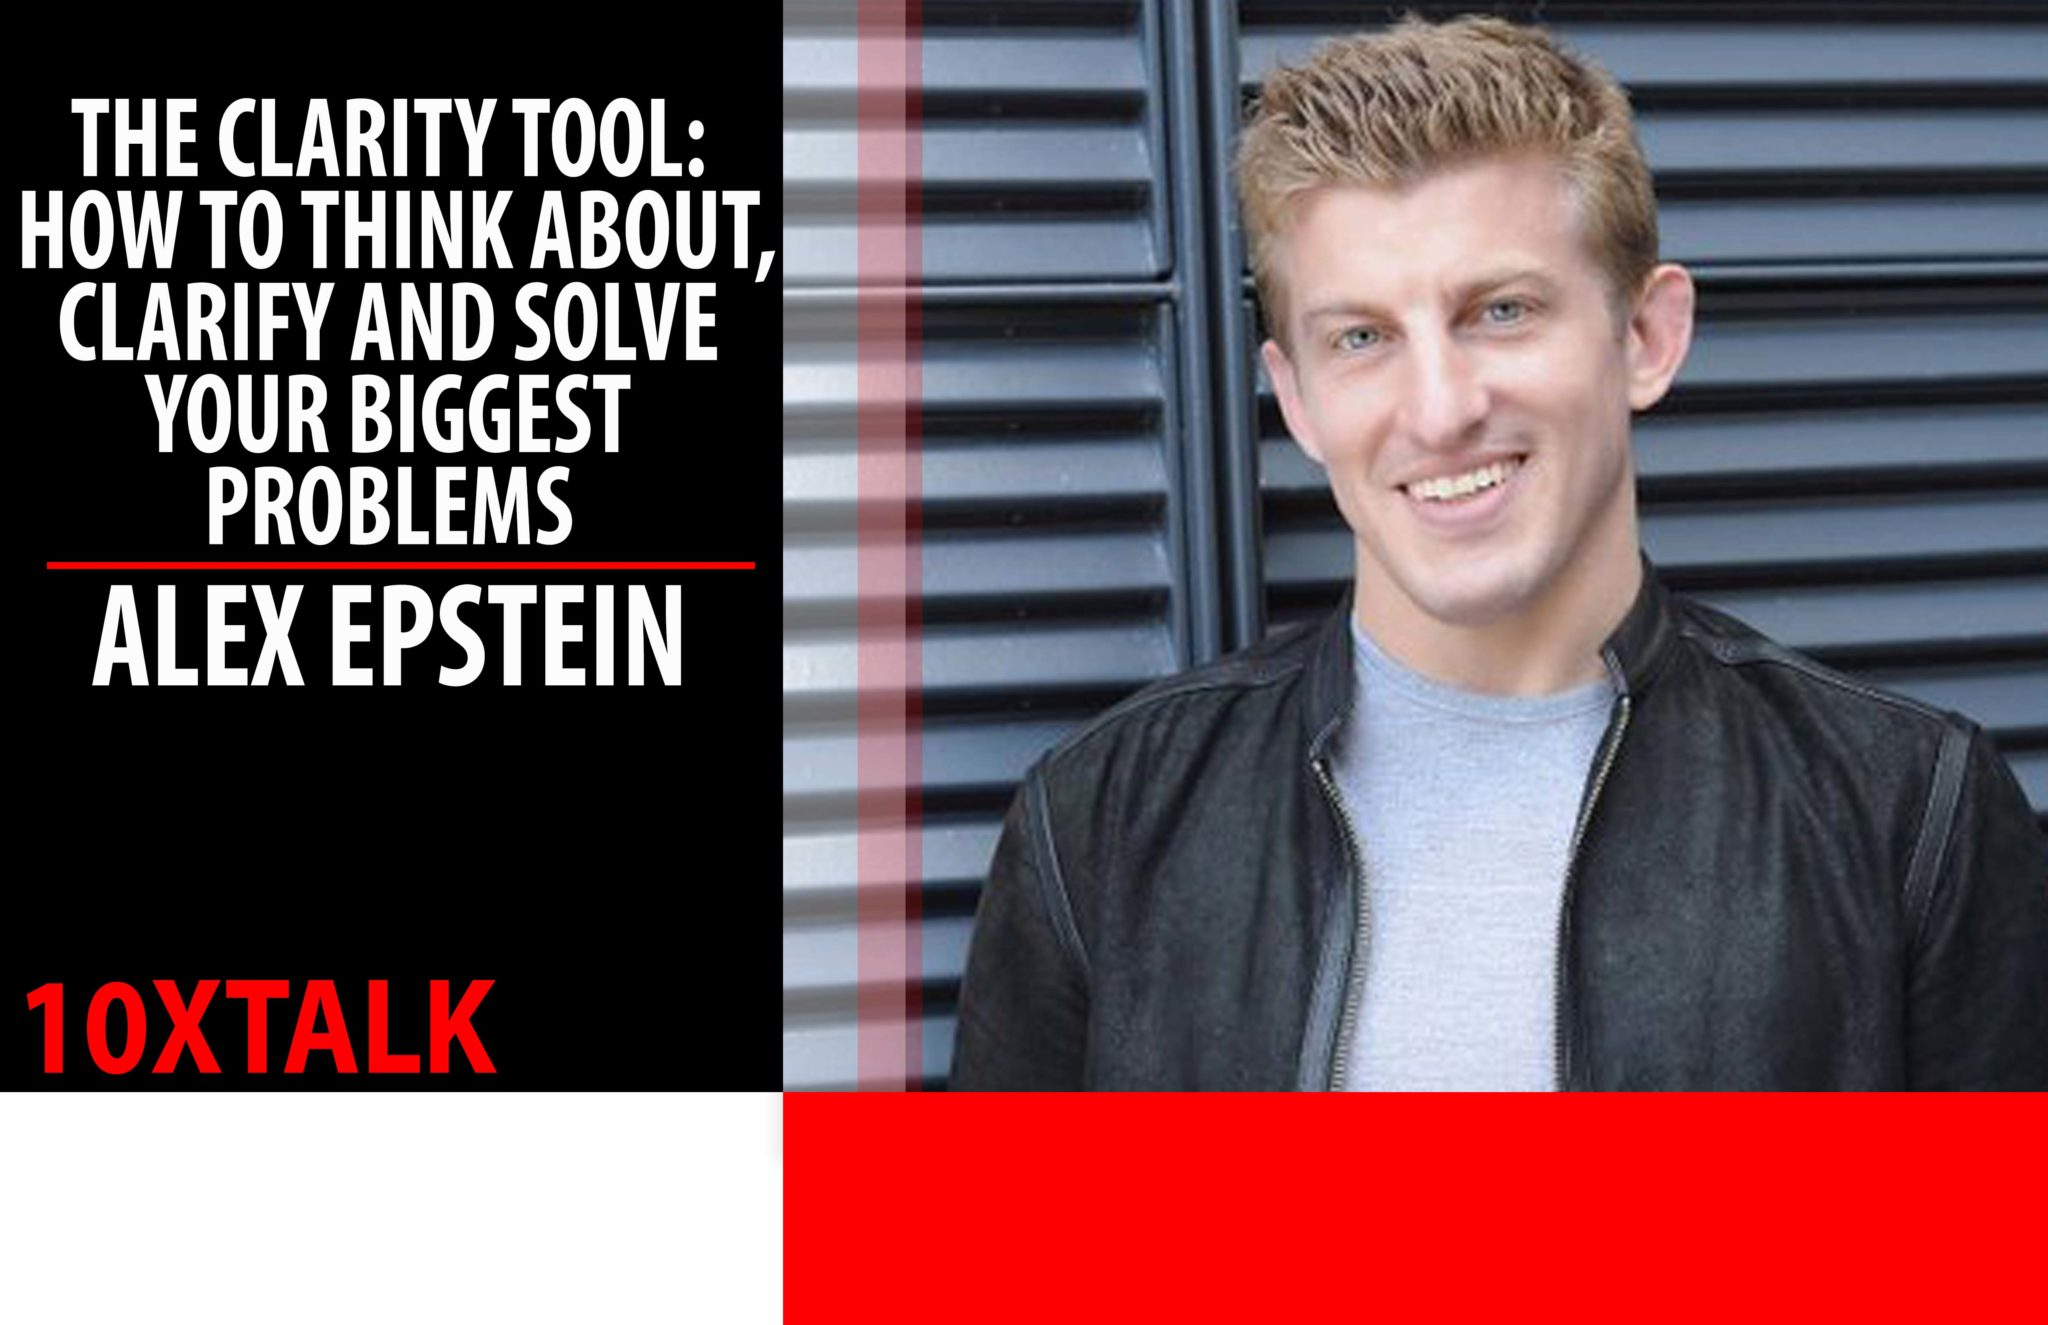 Alex Epstein - The Clarity Tool - How to Think About, Clarity, and Solve Your Biggest Problems with Alex Epstein at Joe Polish's Genius Network